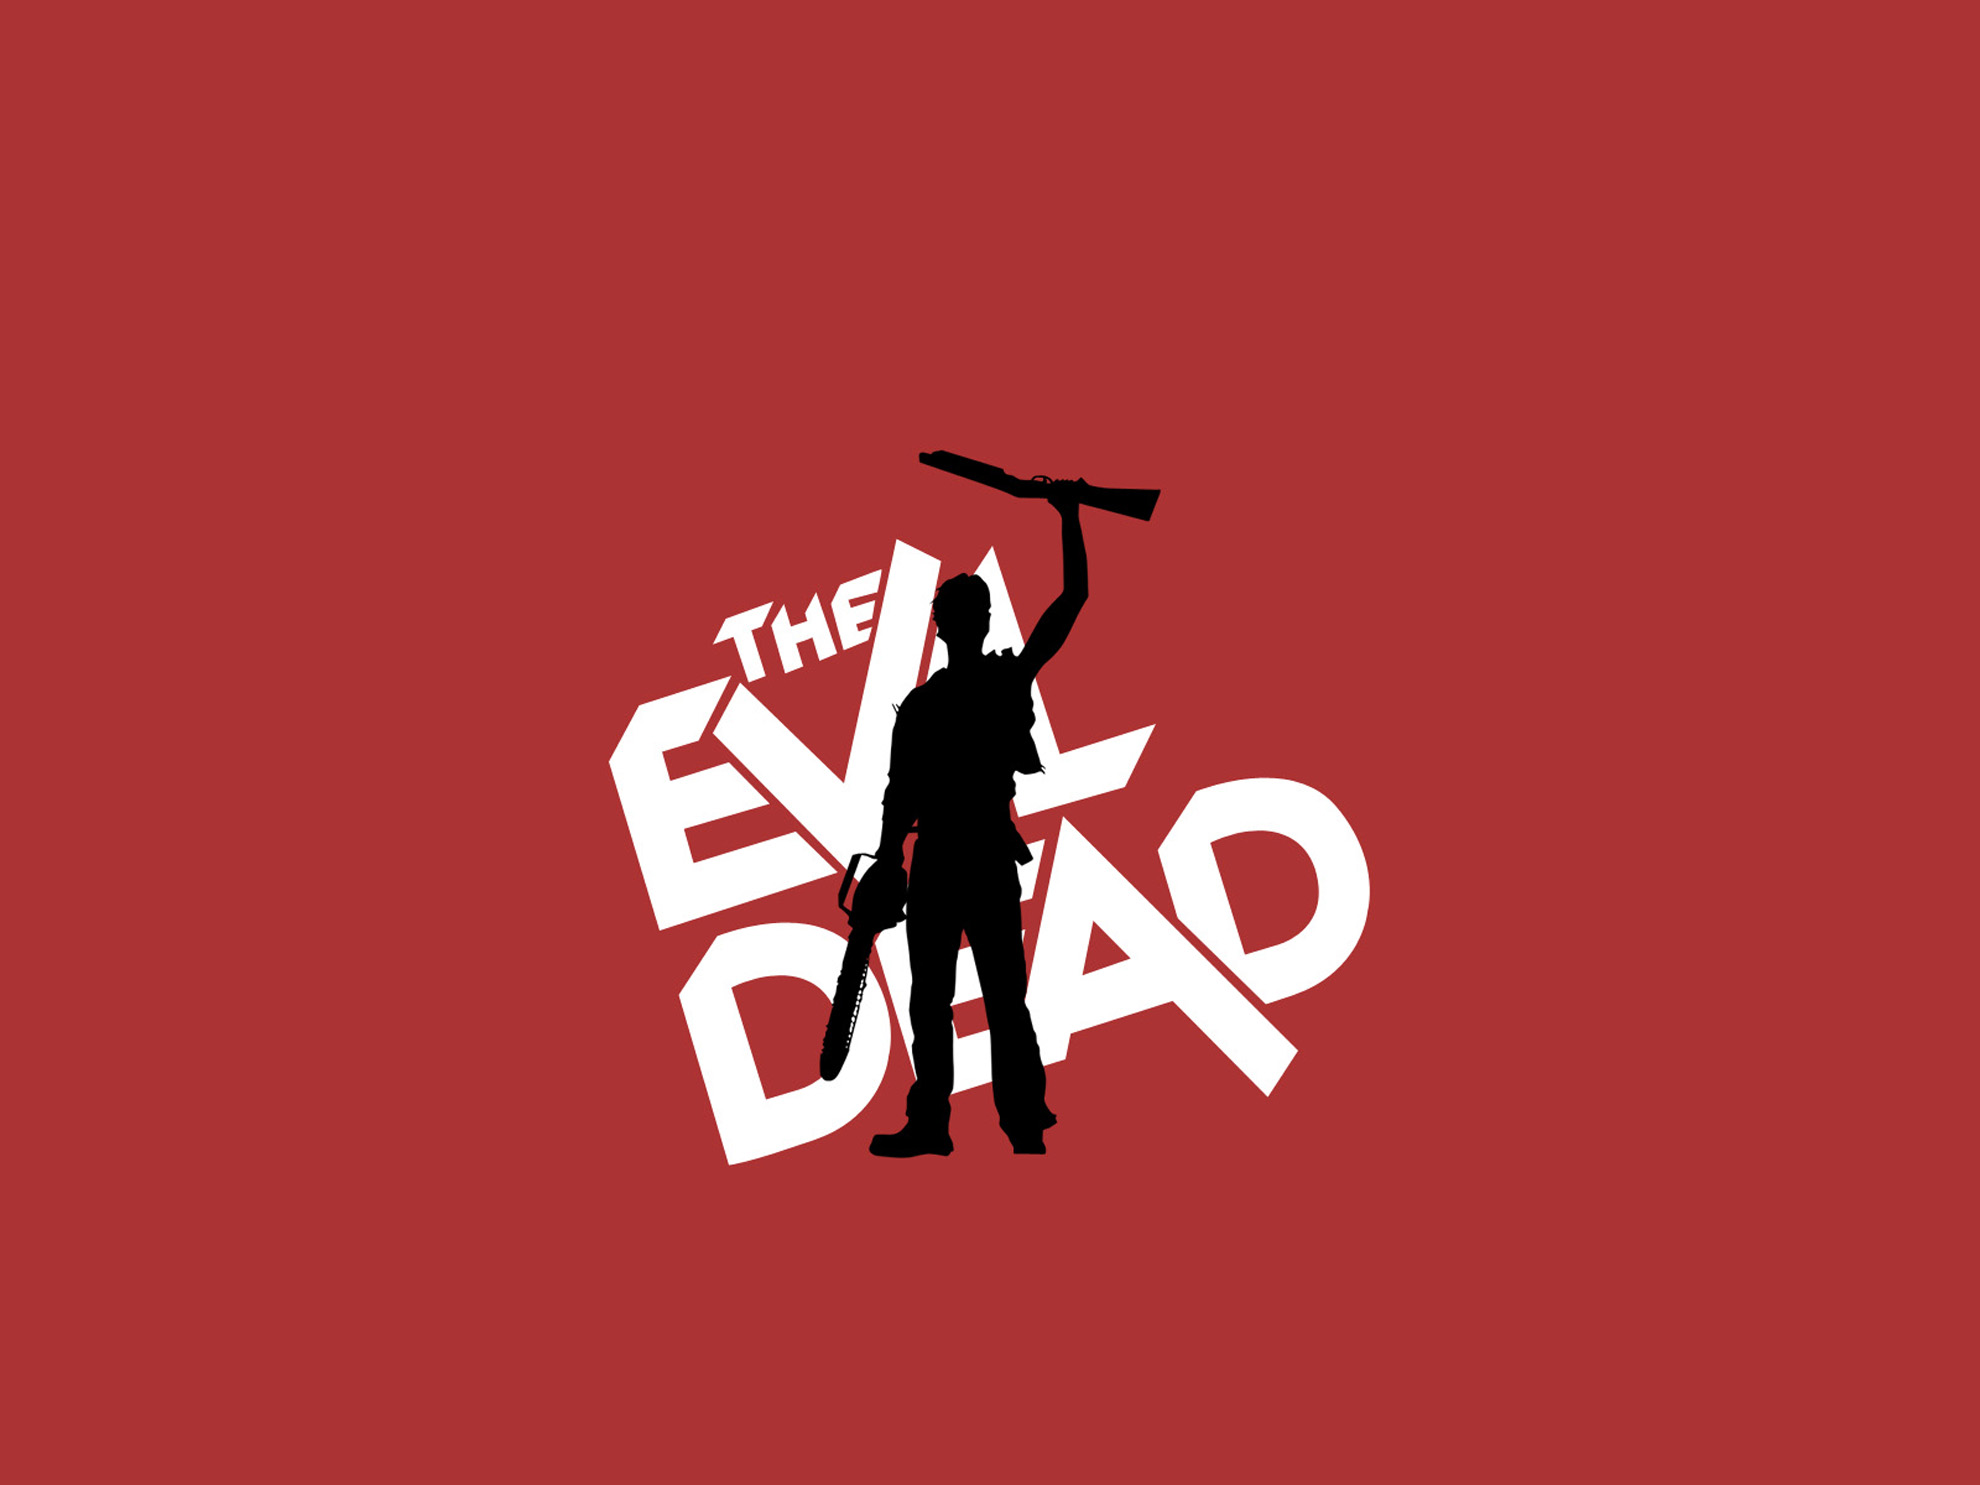 Collection of Evil Dead Wallpaper on HDWallpapers